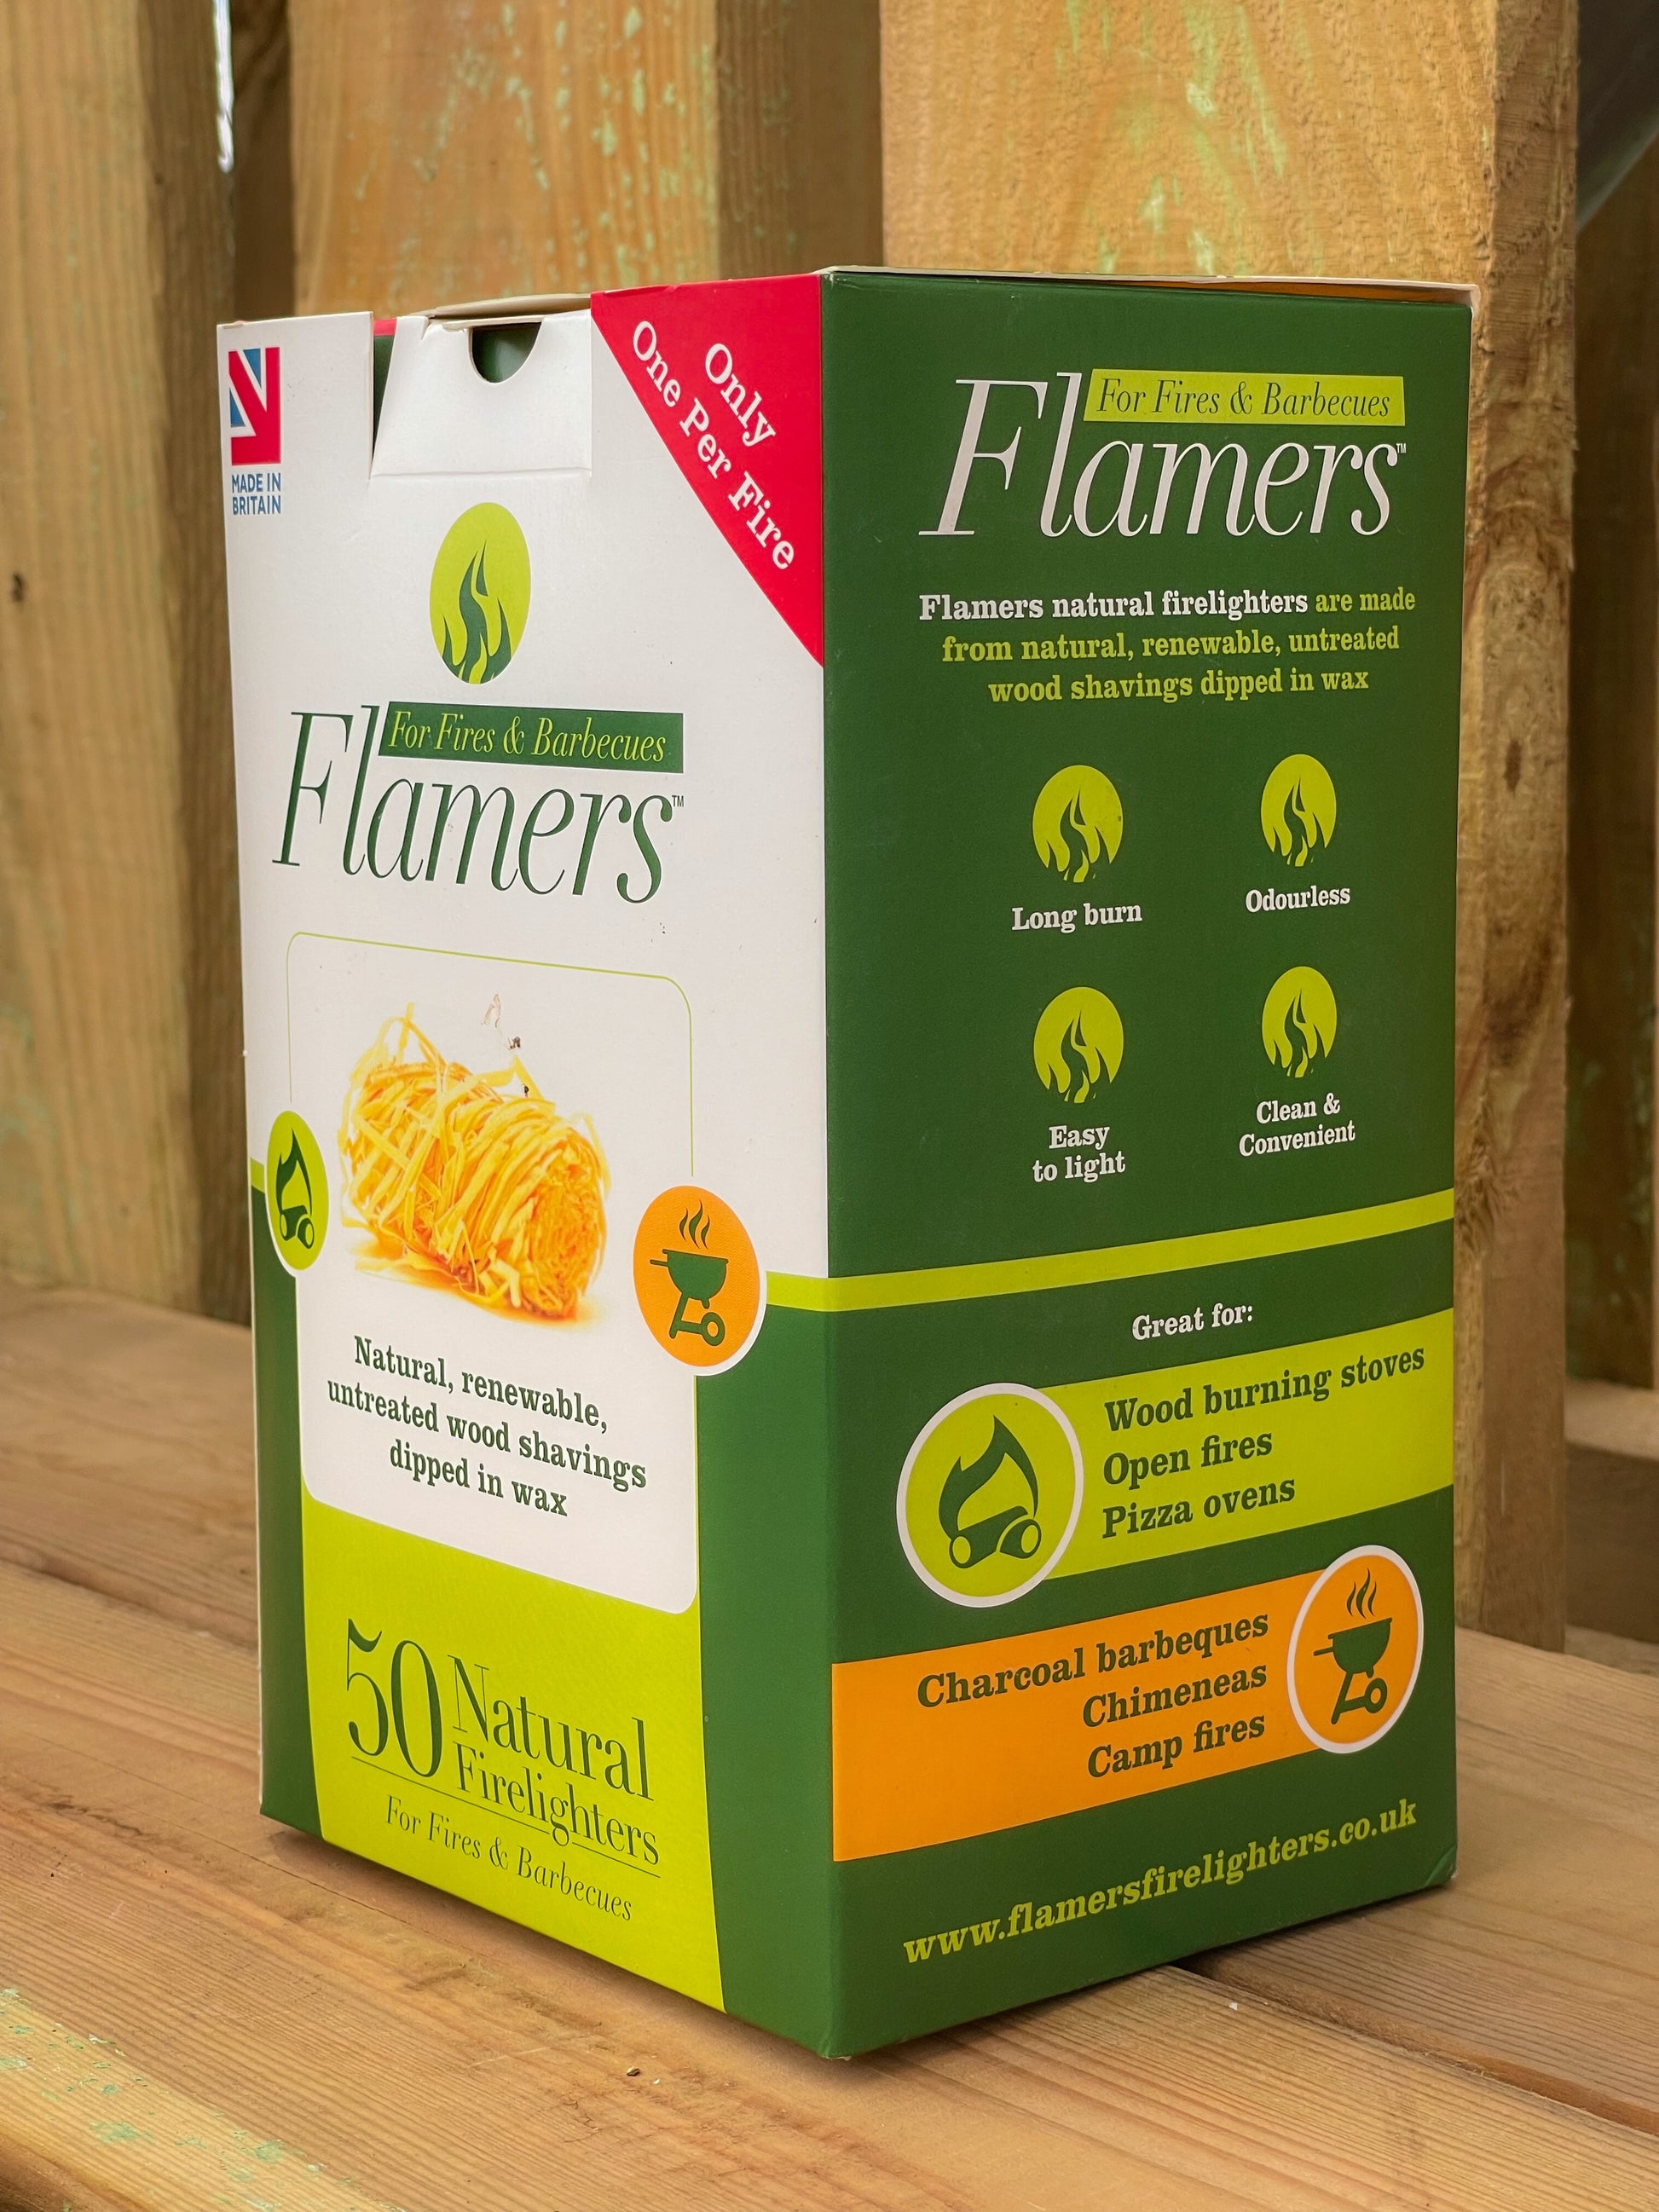 Back of box of Flamer Firelighters showing the benefits of using Flamers. long burn time, odourless, easy to light, clean